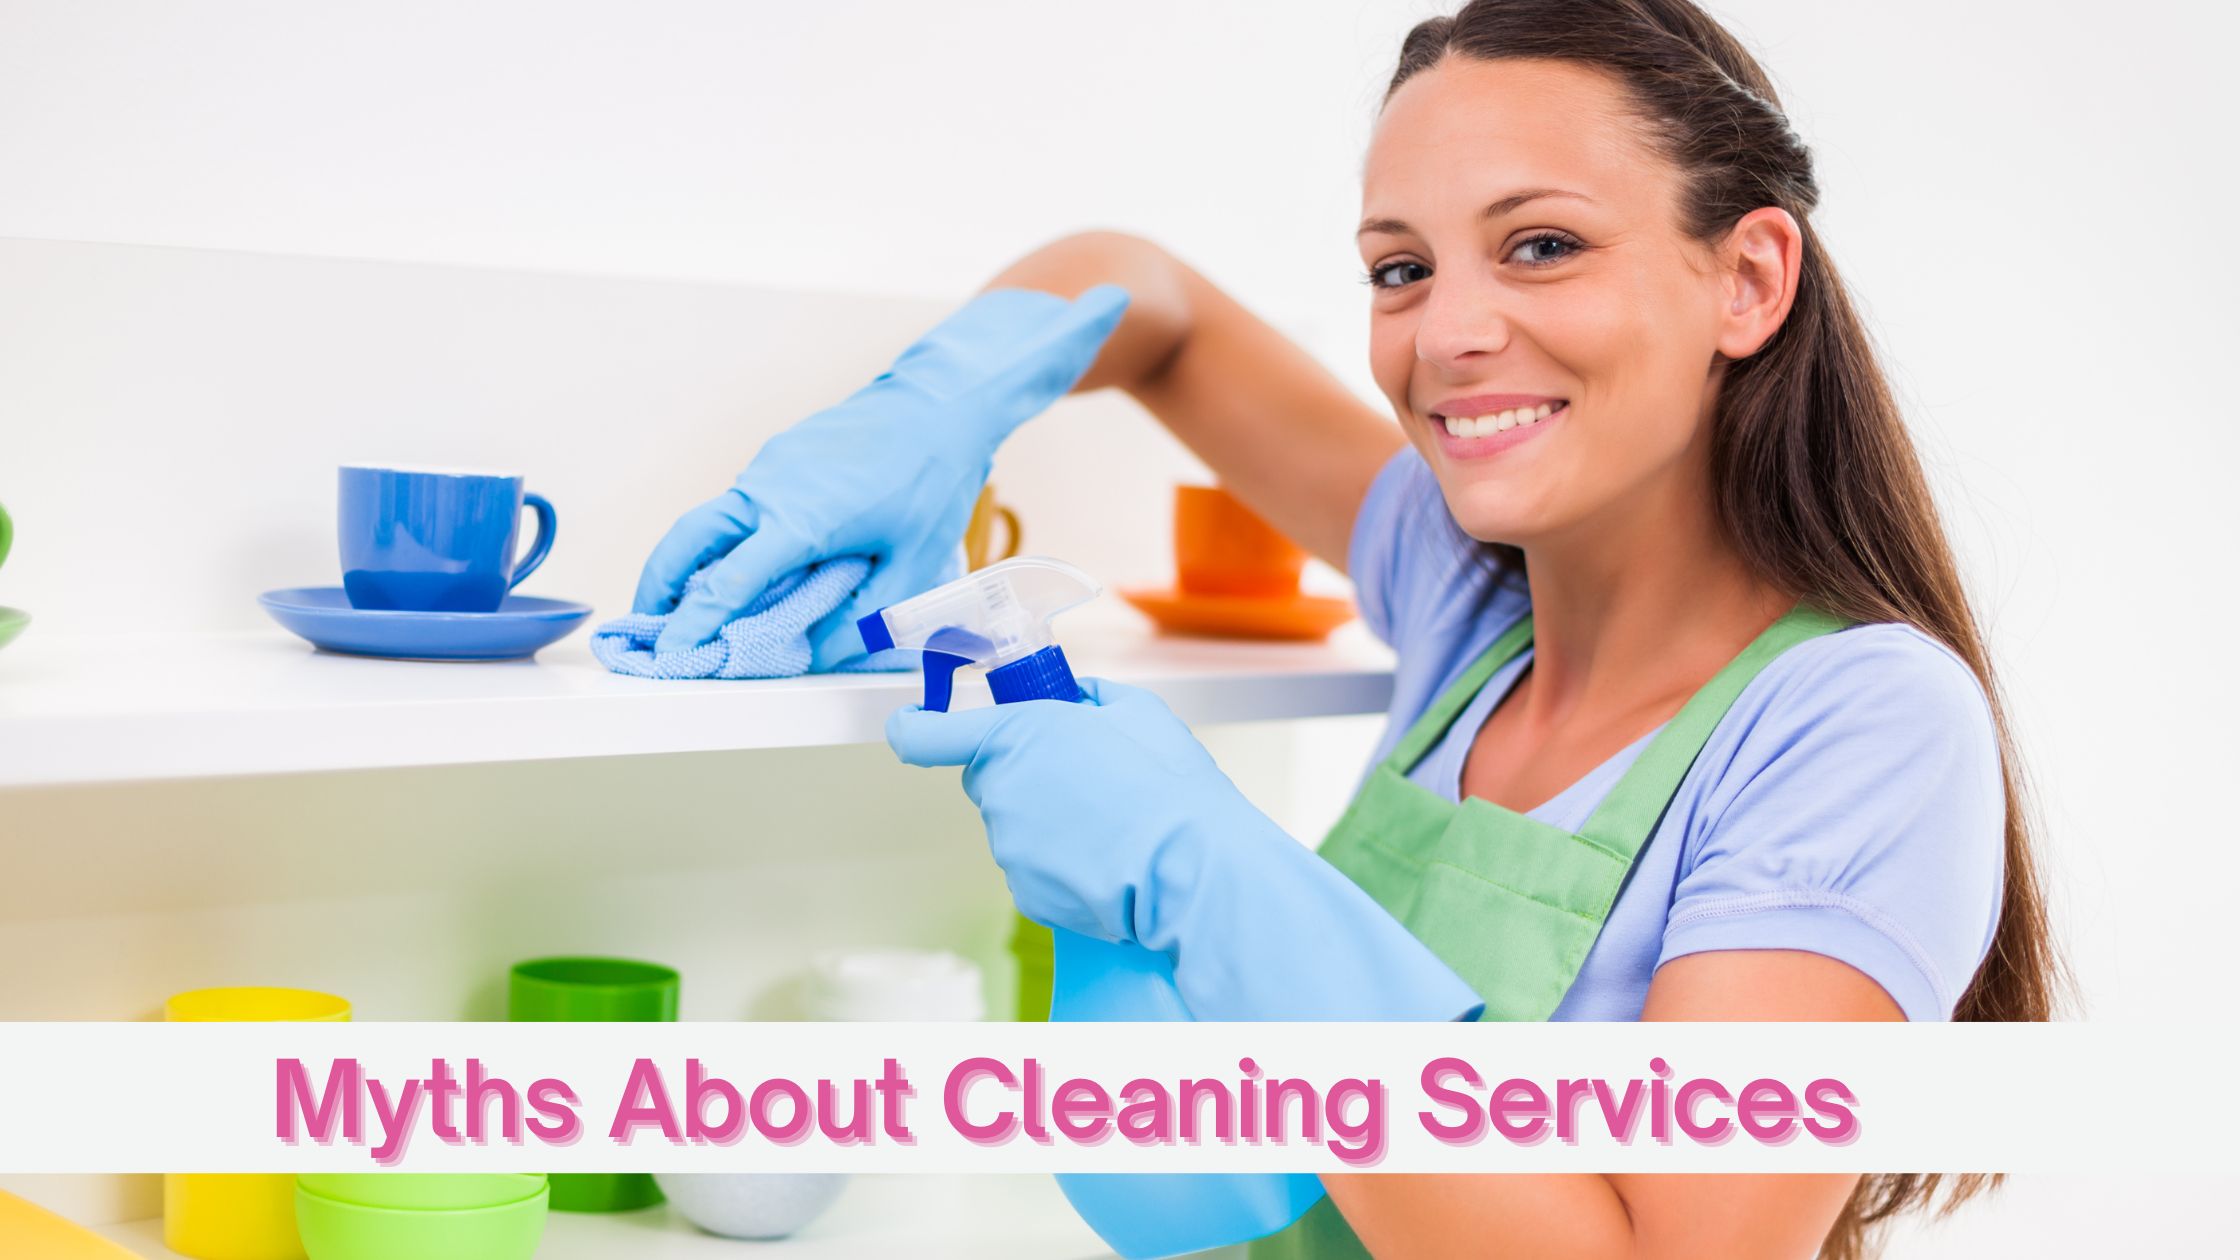 Misconceptions about maid services